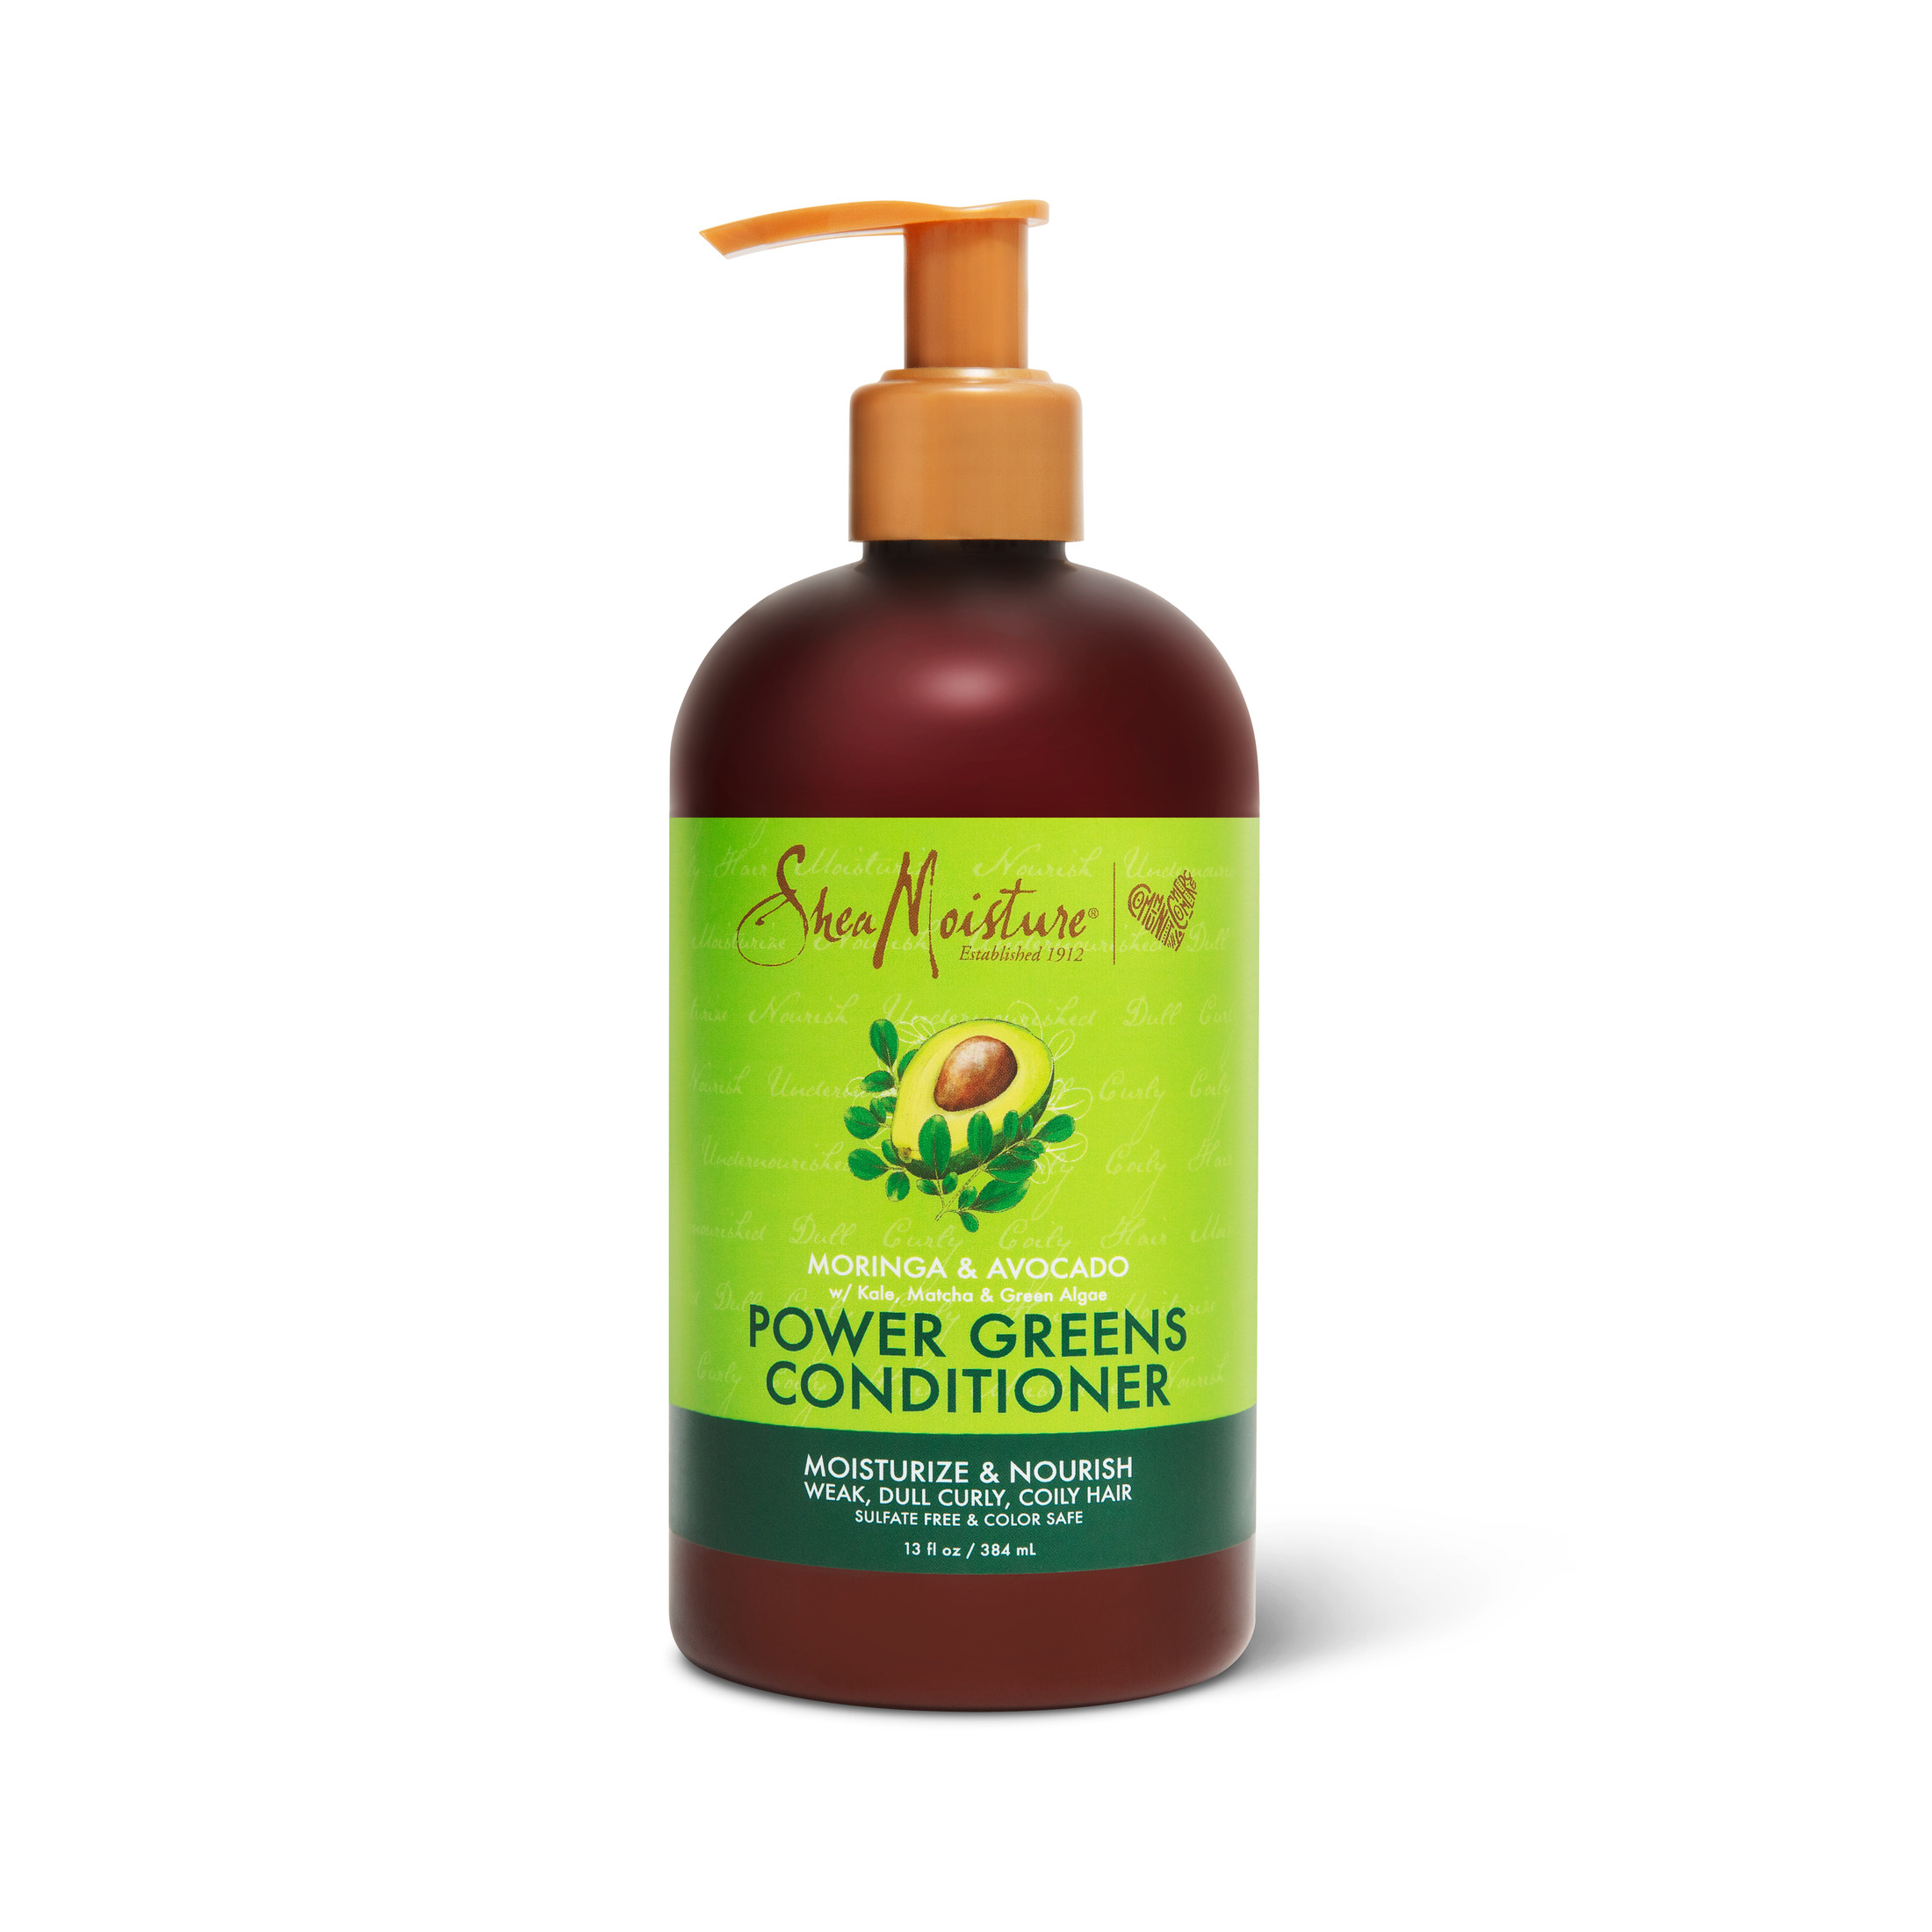 SheaMoisture Power Greens Deep Conditioner for Curly Hair with Kale, Moringa and Avocado, 13 fl oz - image 1 of 12